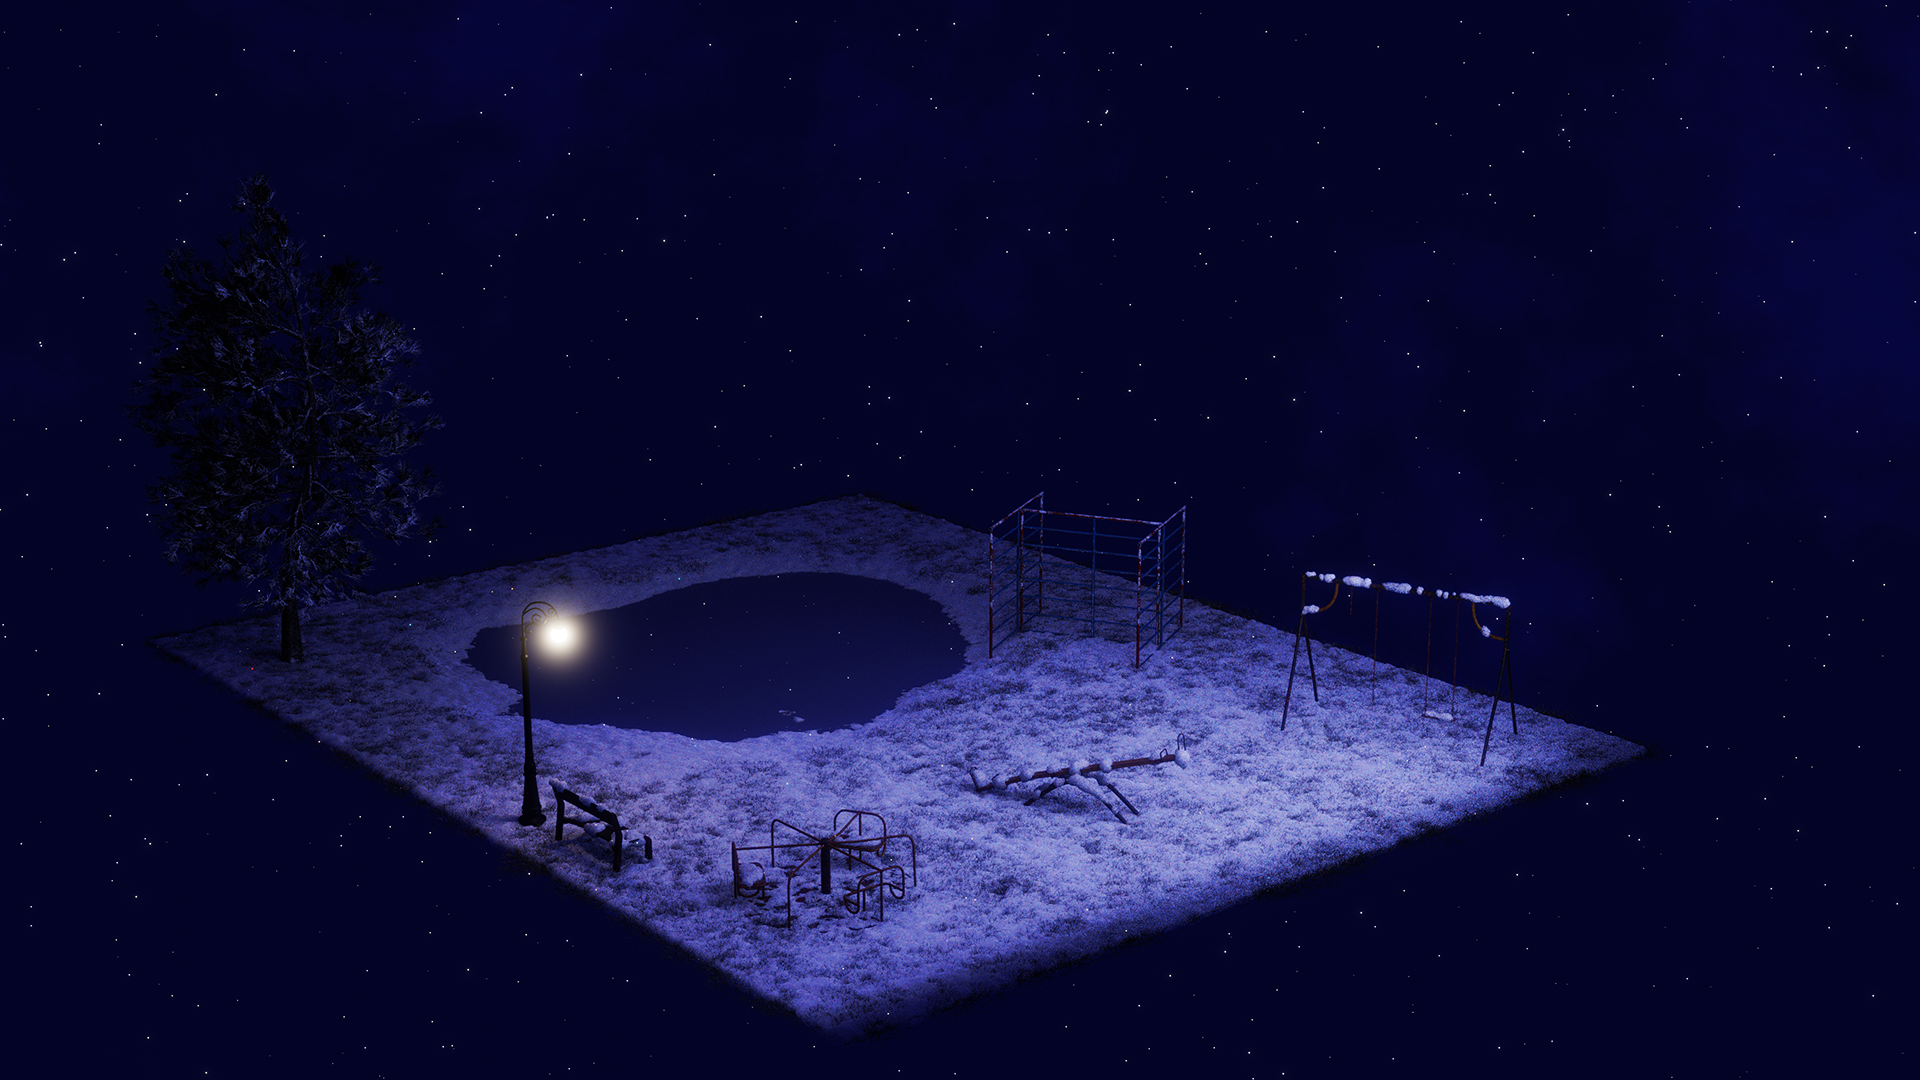 A snowy plane with a frozen pond, a tree, a broken down and abandoned playground, a park bench, and an illuminating street lamp floating in a night sky lit by stars.